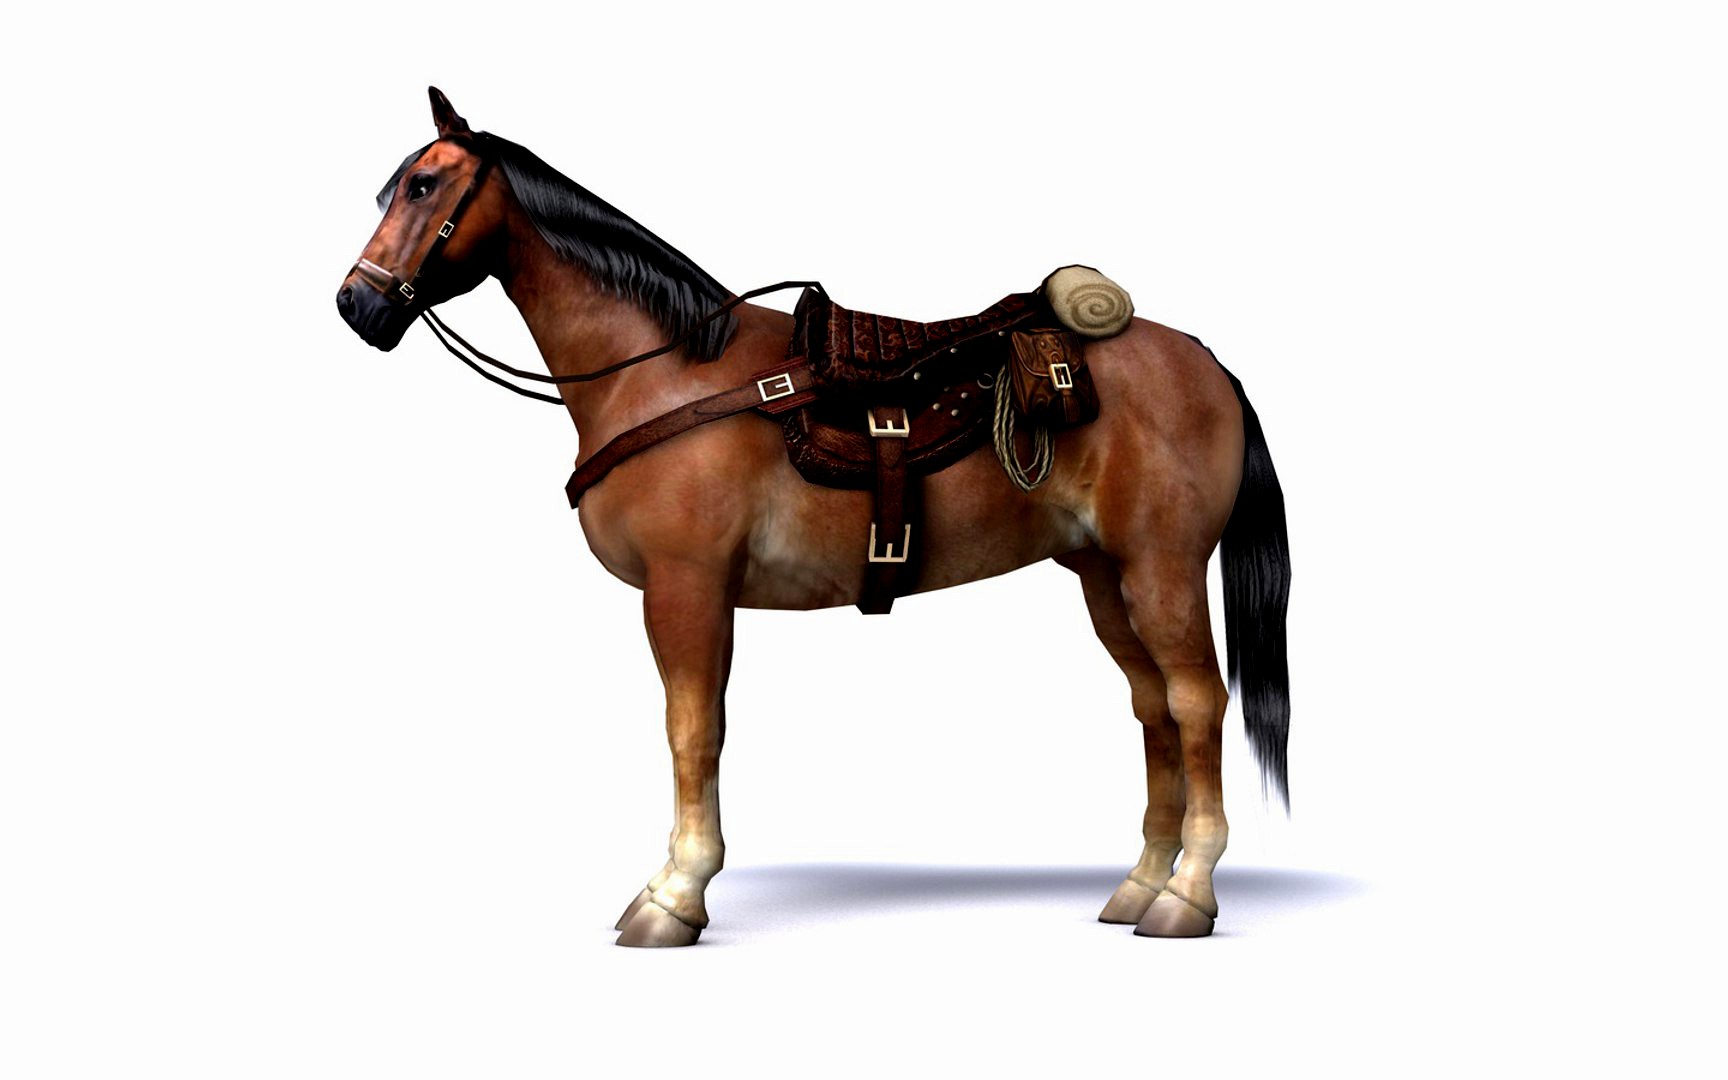 Brown Horse with saddle and packs